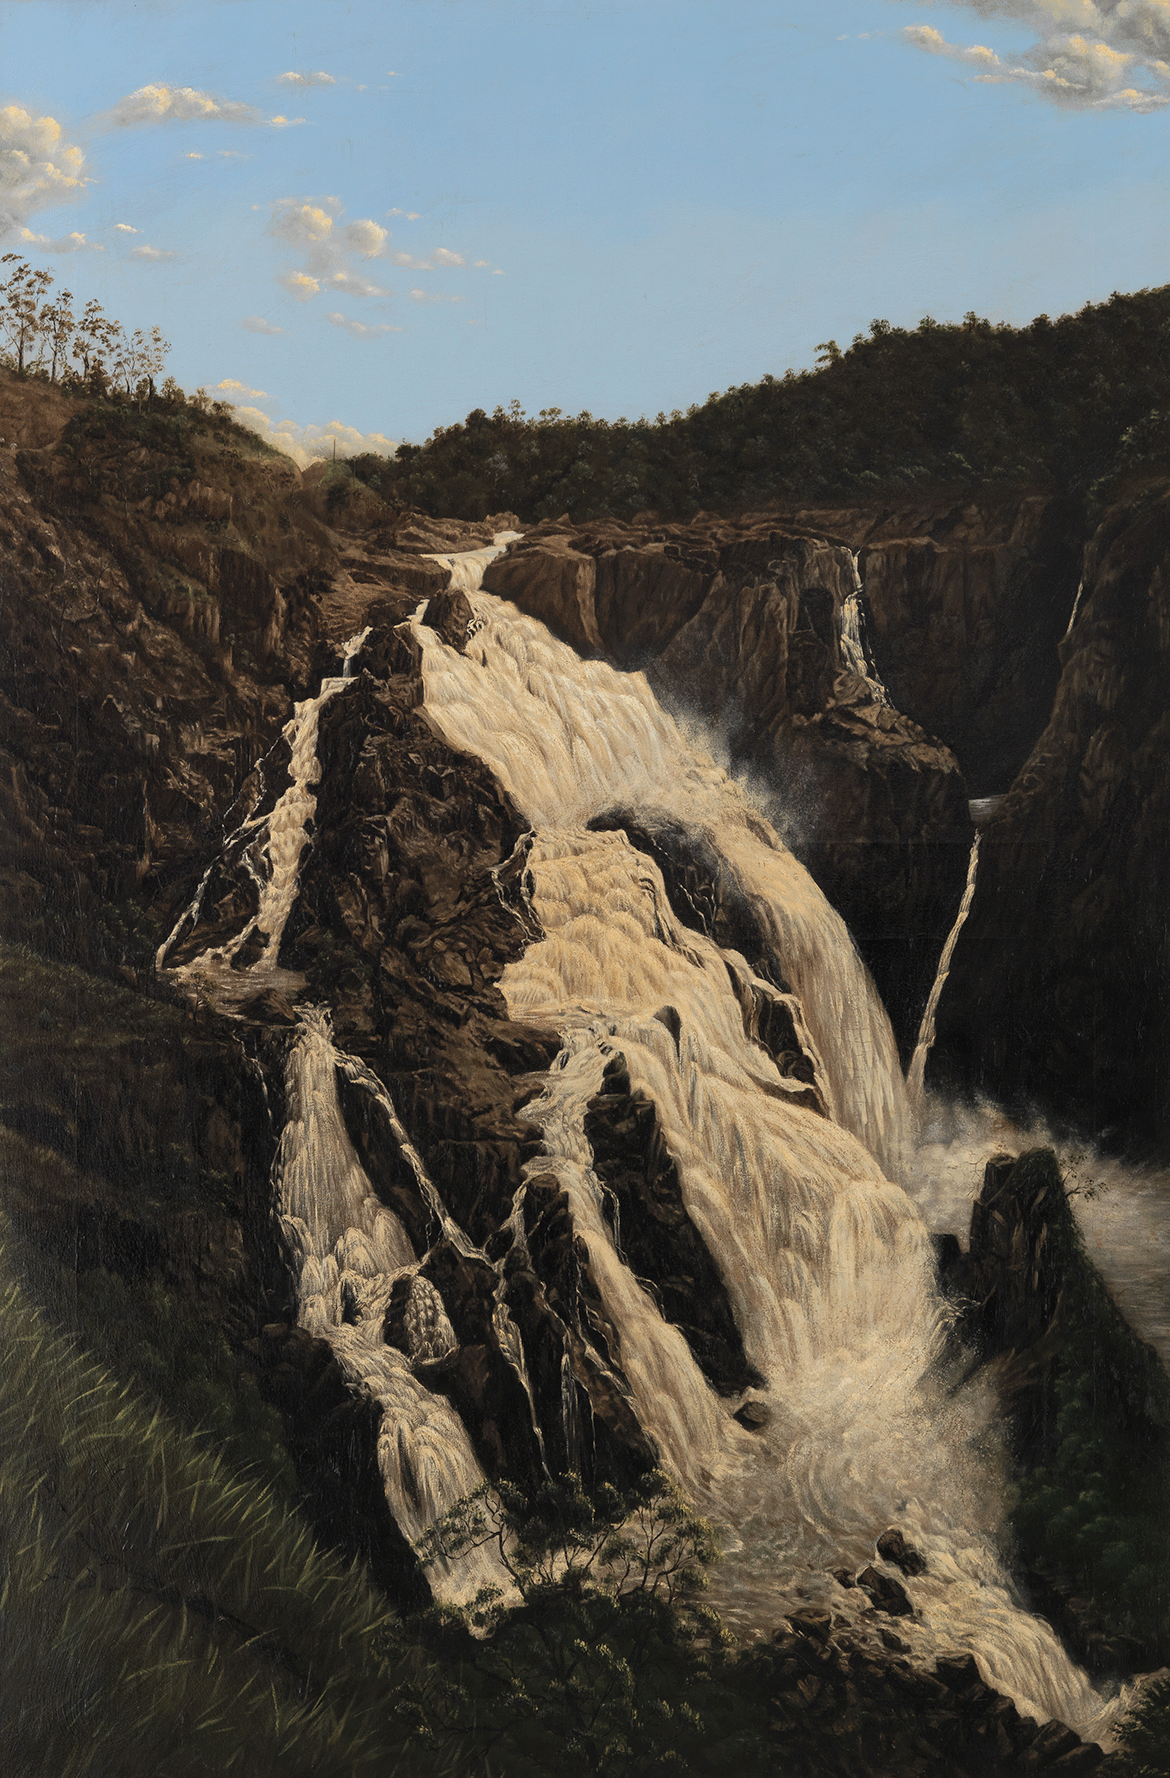 Barron Falls: Reflecting on the forces of nature